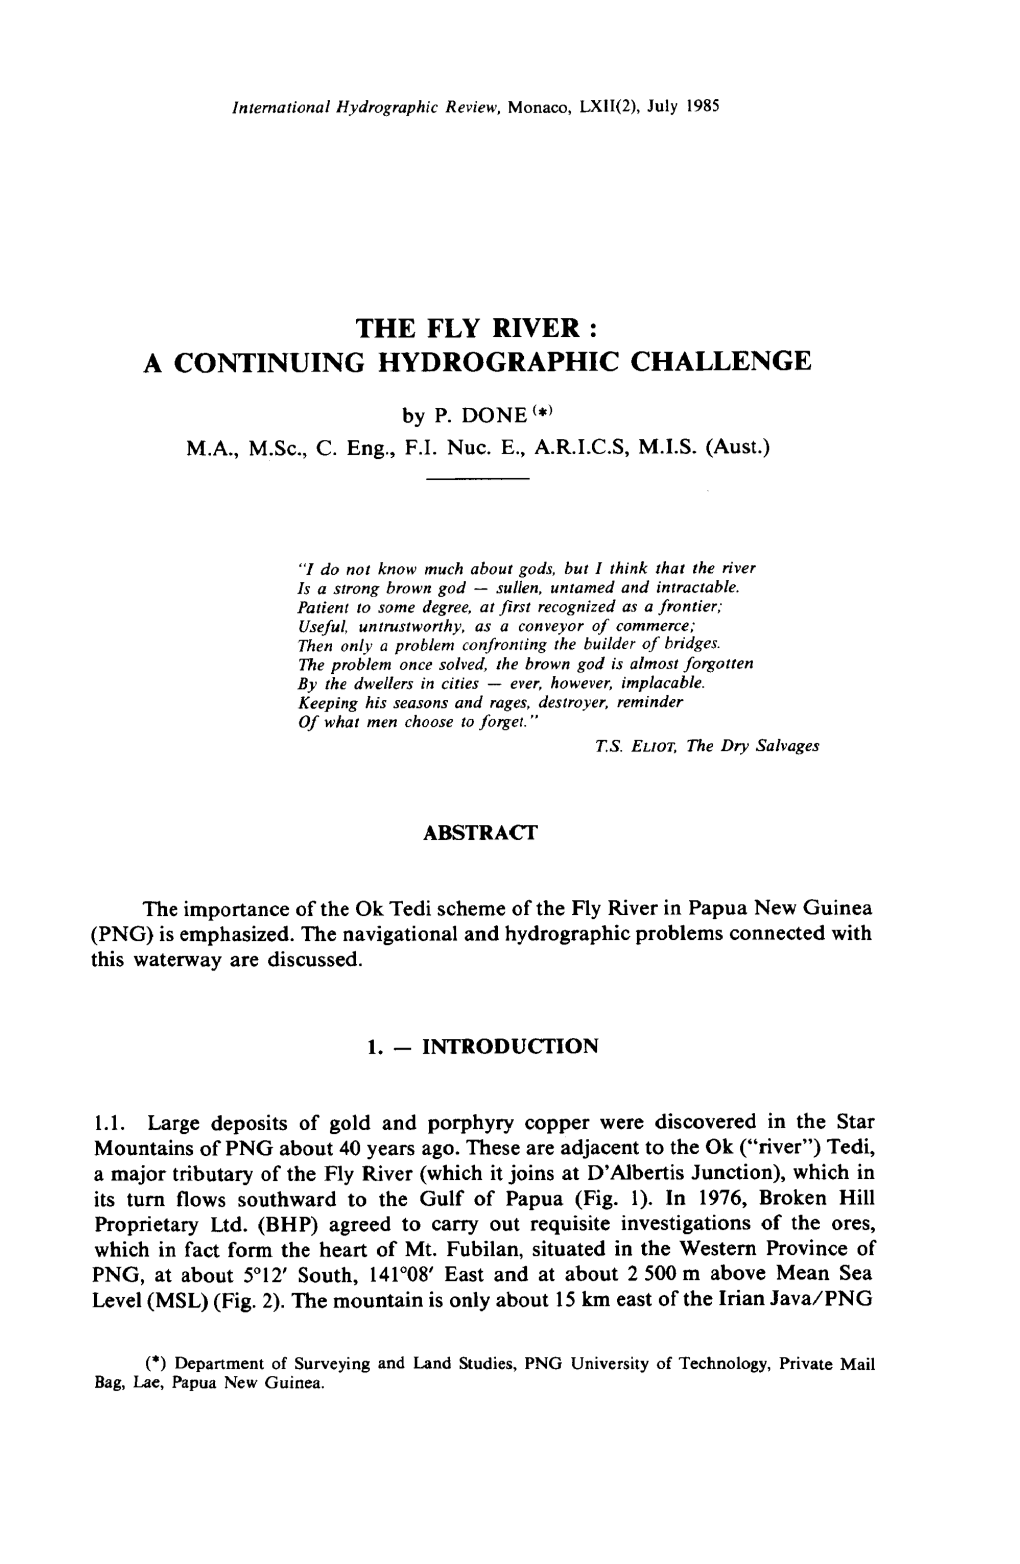 The Fly River : a Continuing Hydrographic Challenge